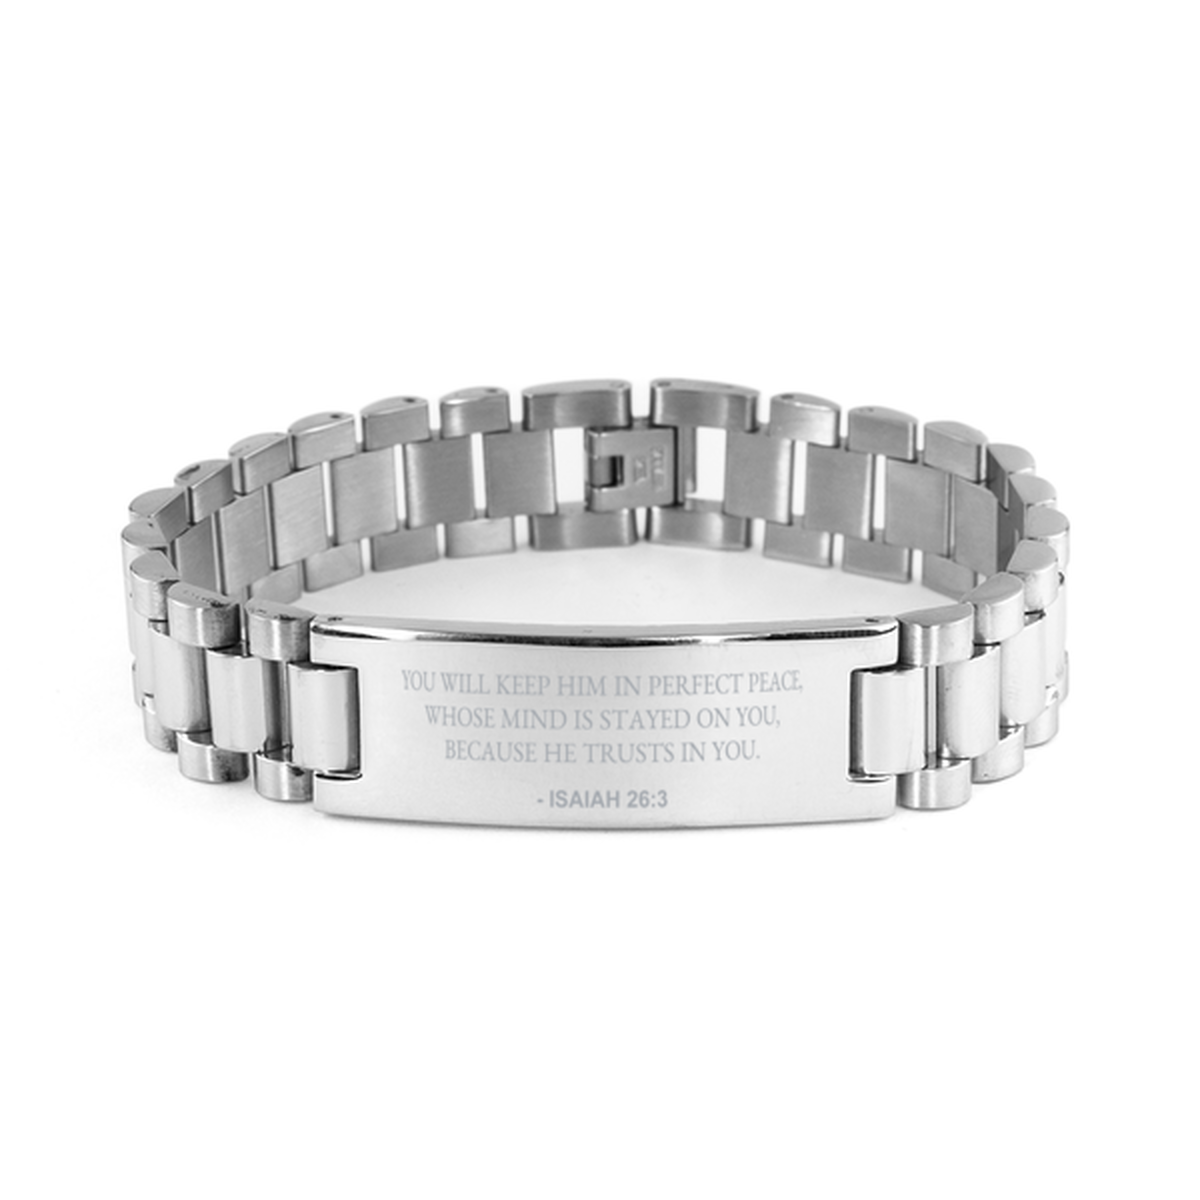 Christian Ladder Stainless Steel Bracelet, Isaiah 26:3 You Will Keep Him In Perfect Peace, Whose Mind Is, Motivational Bible Verse Gifts For Men Women